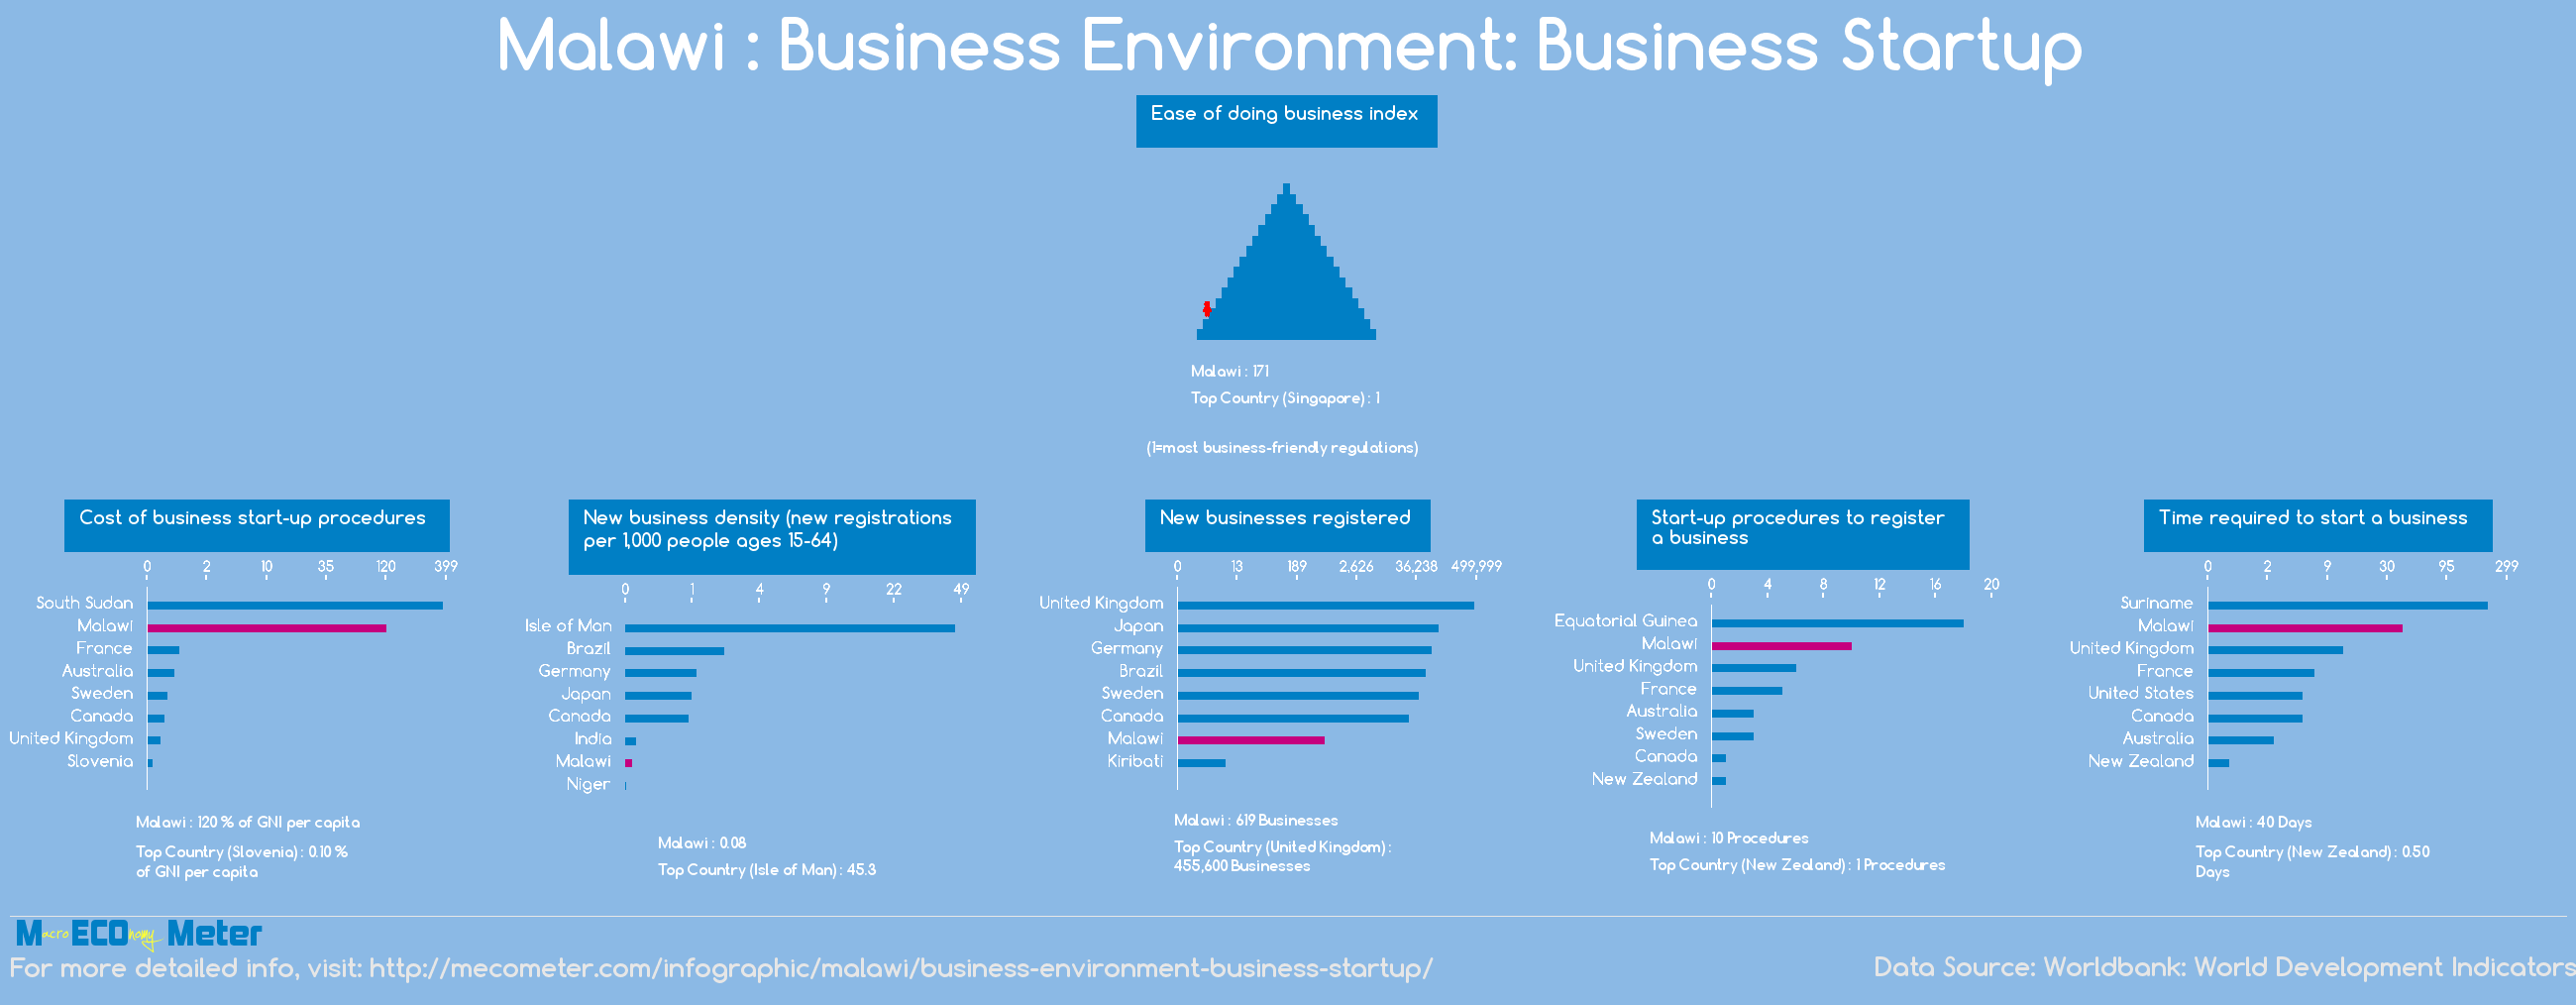 Malawi : Business Environment: Business Startup